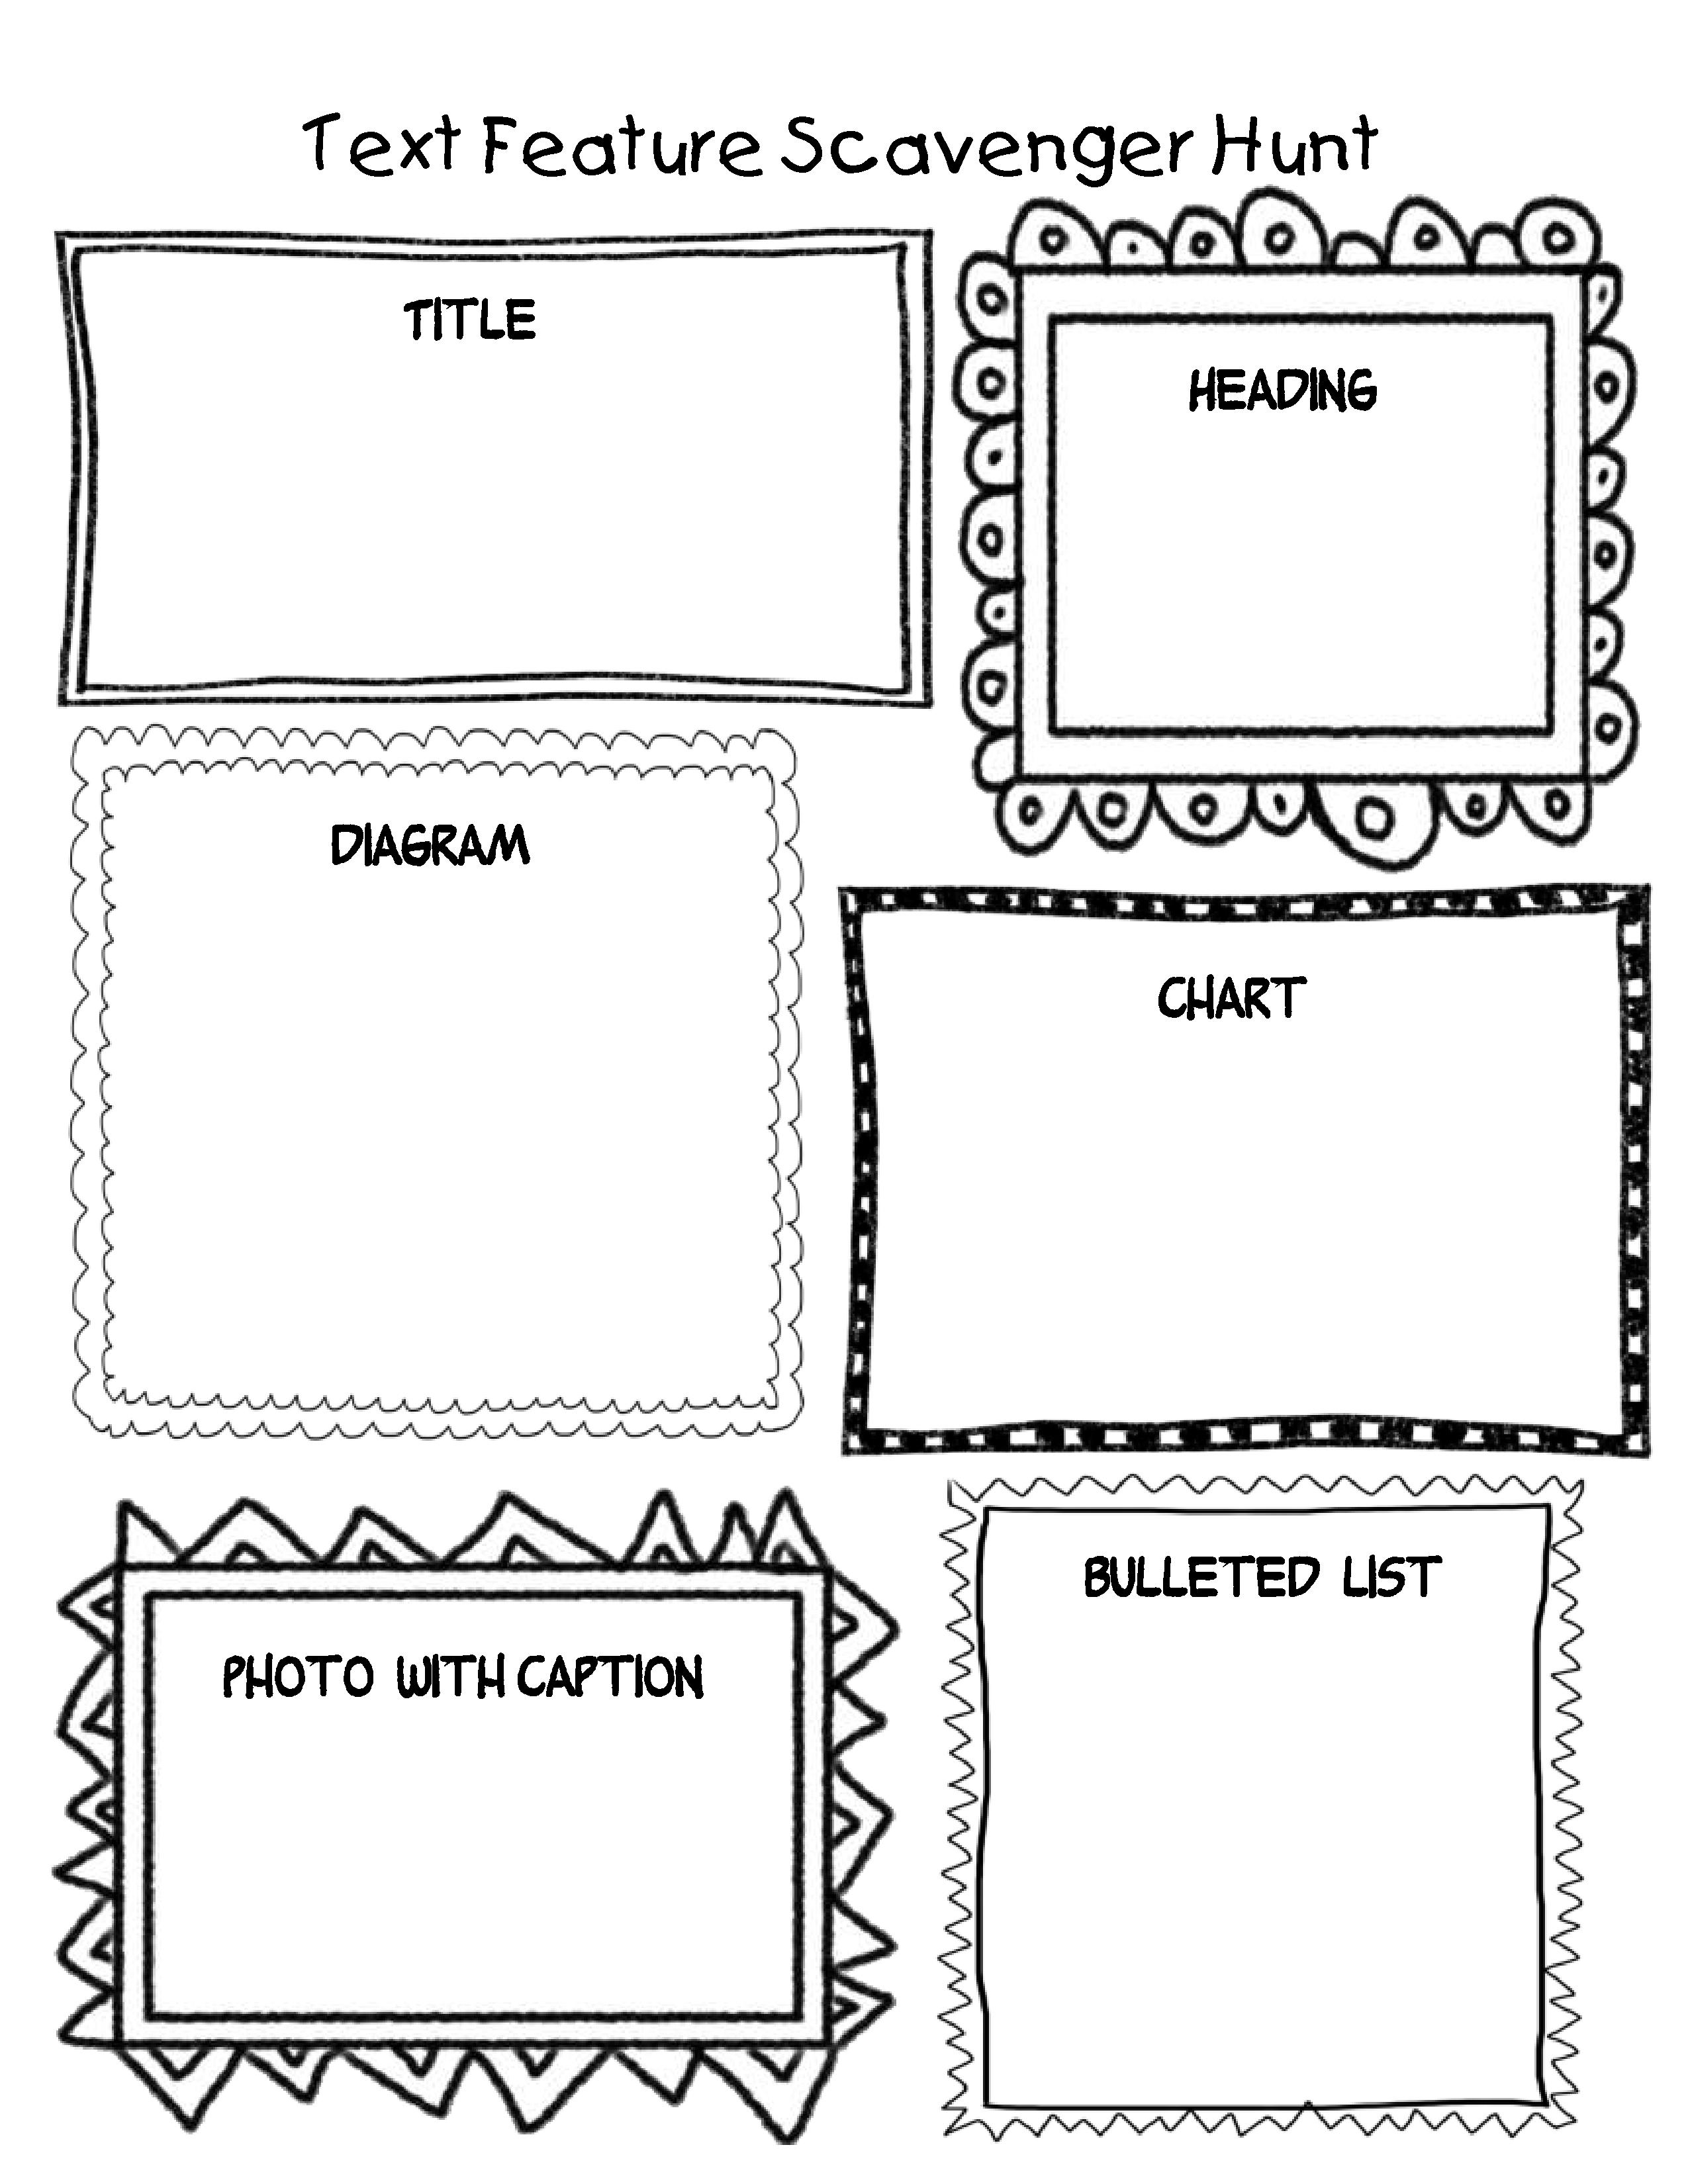 Nonfiction Text Features Worksheet 3rd Grade Image